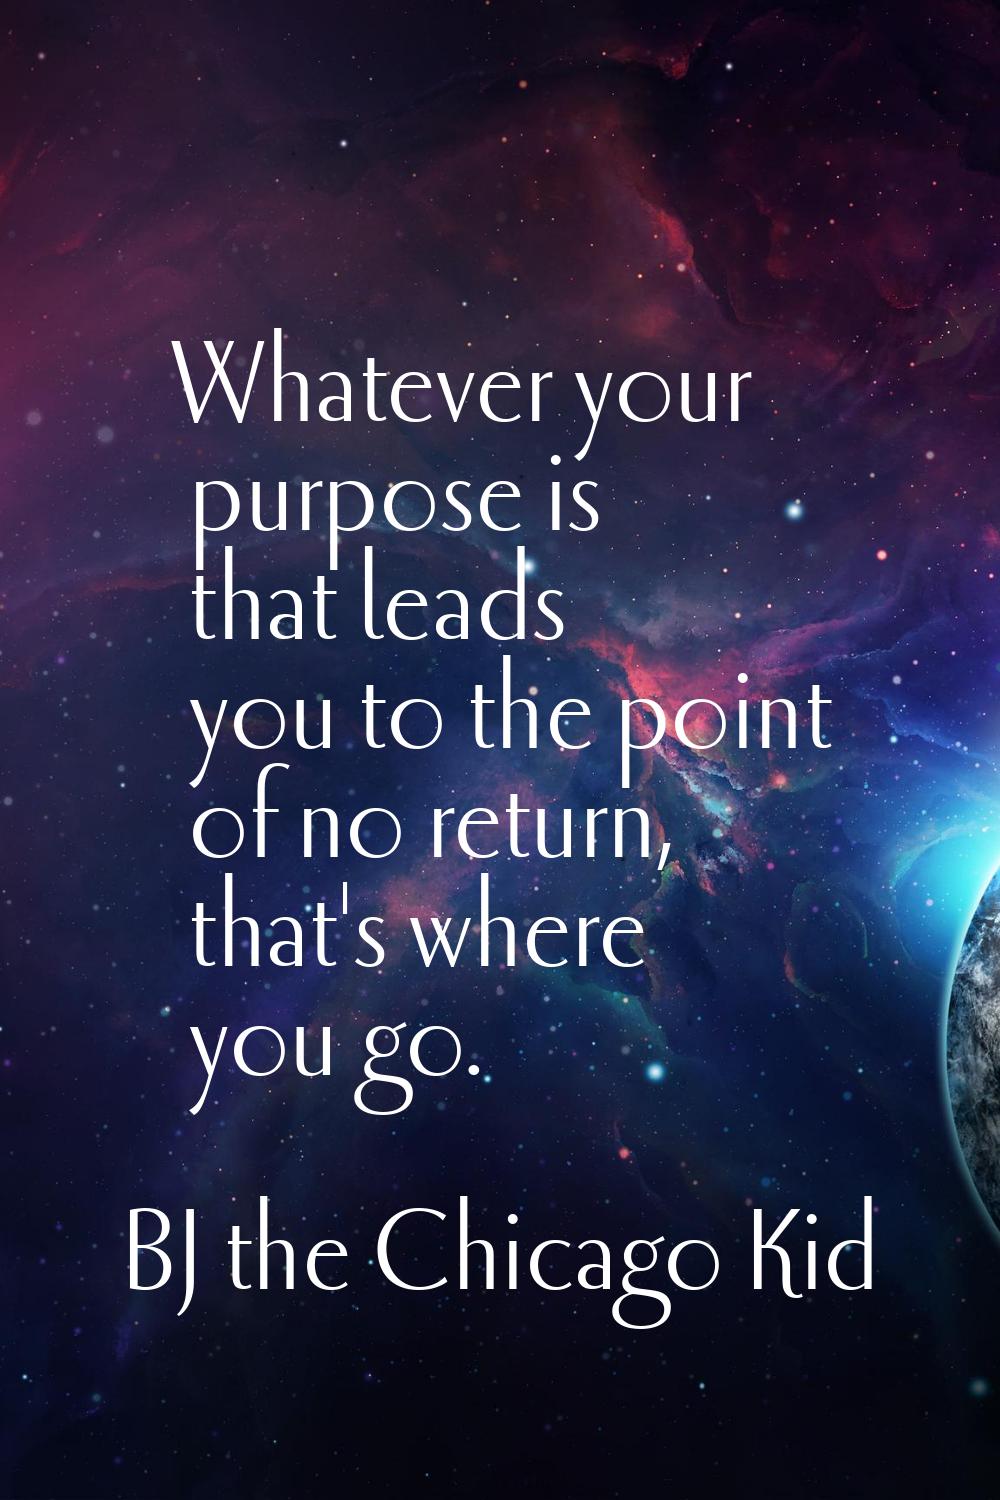 Whatever your purpose is that leads you to the point of no return, that's where you go.